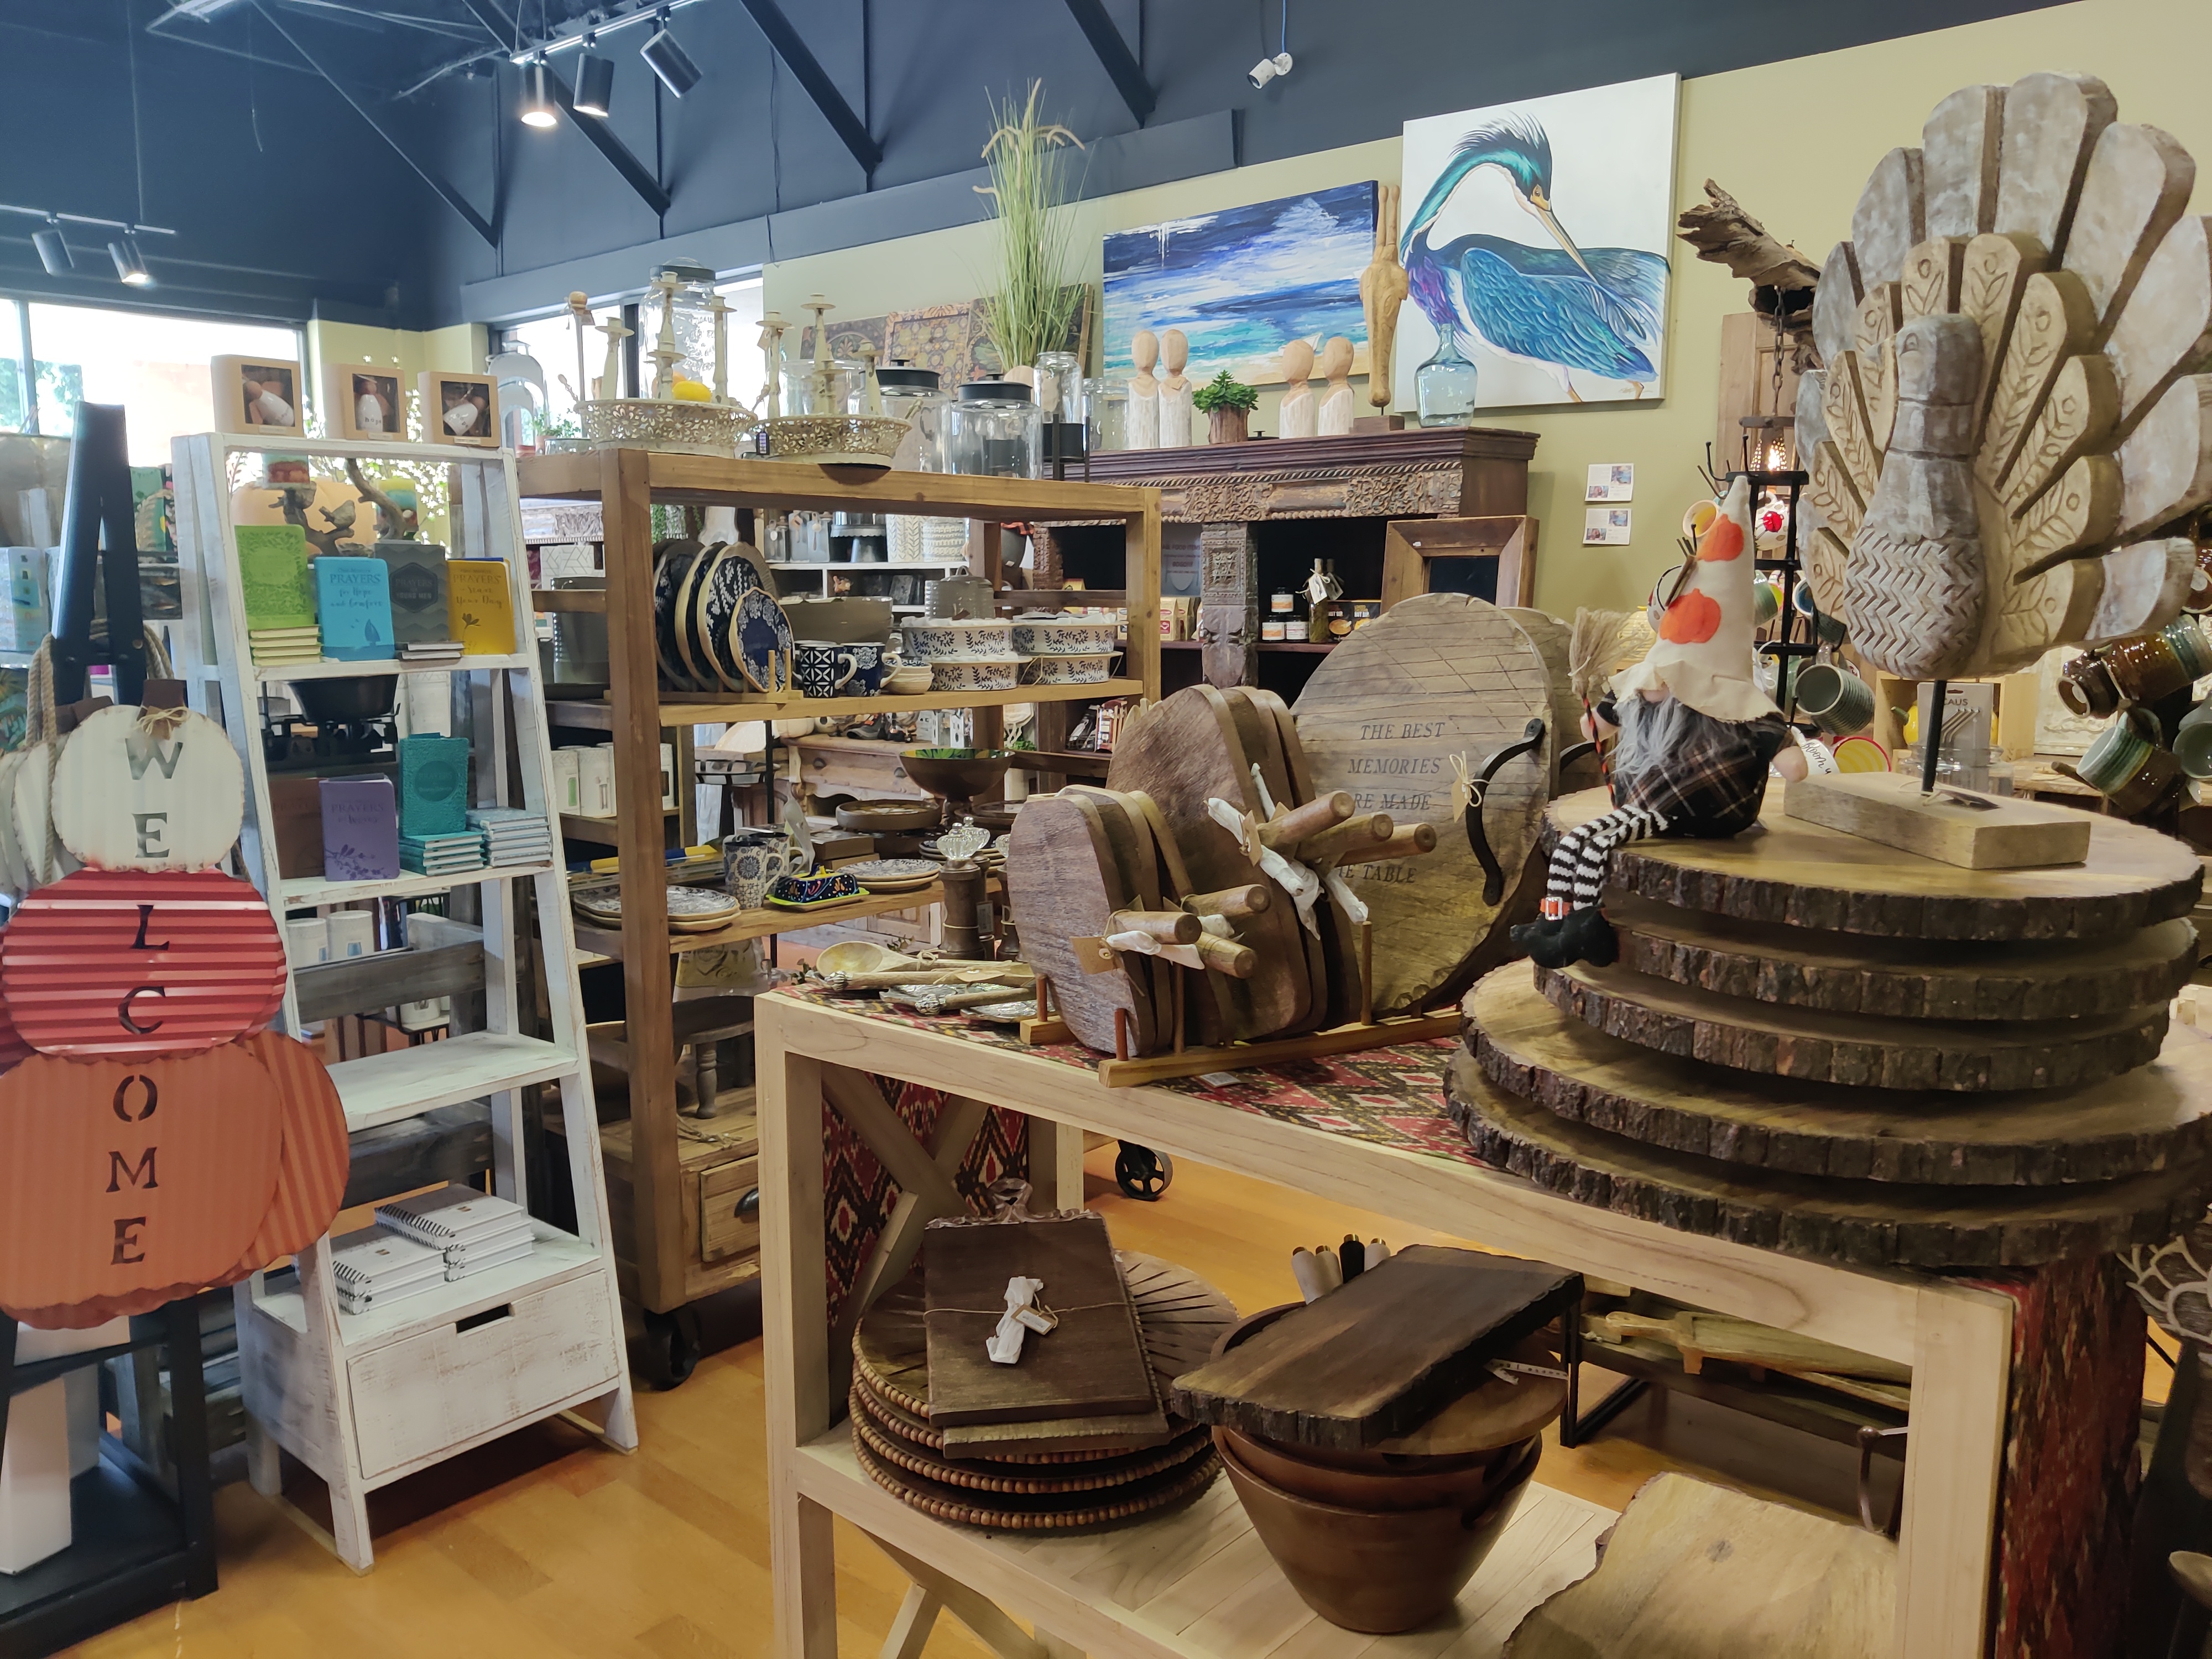 Image for COMMUNITY SPOTLIGHT: Texas Artisan decorates League City with creativity and passion